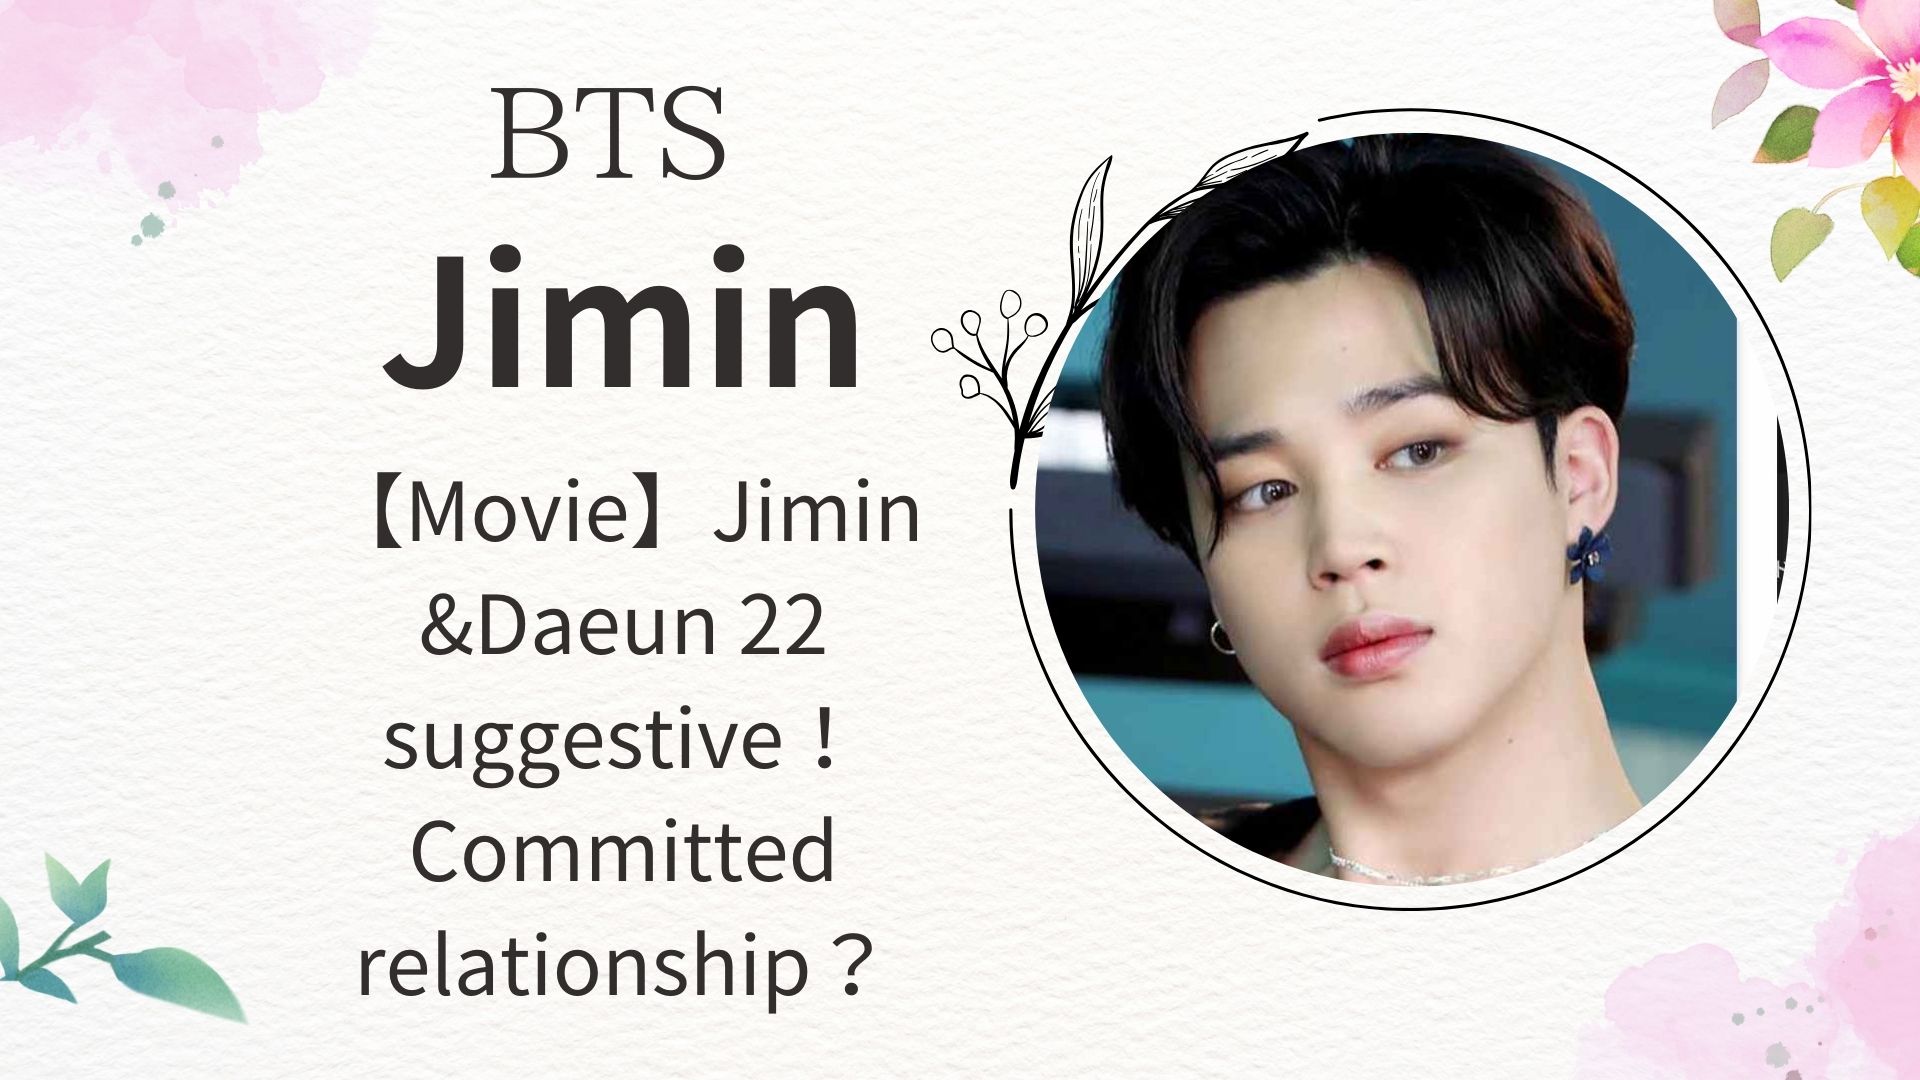 【Movie】Jimin &Daeun 22 suggestive！Committed relationship？